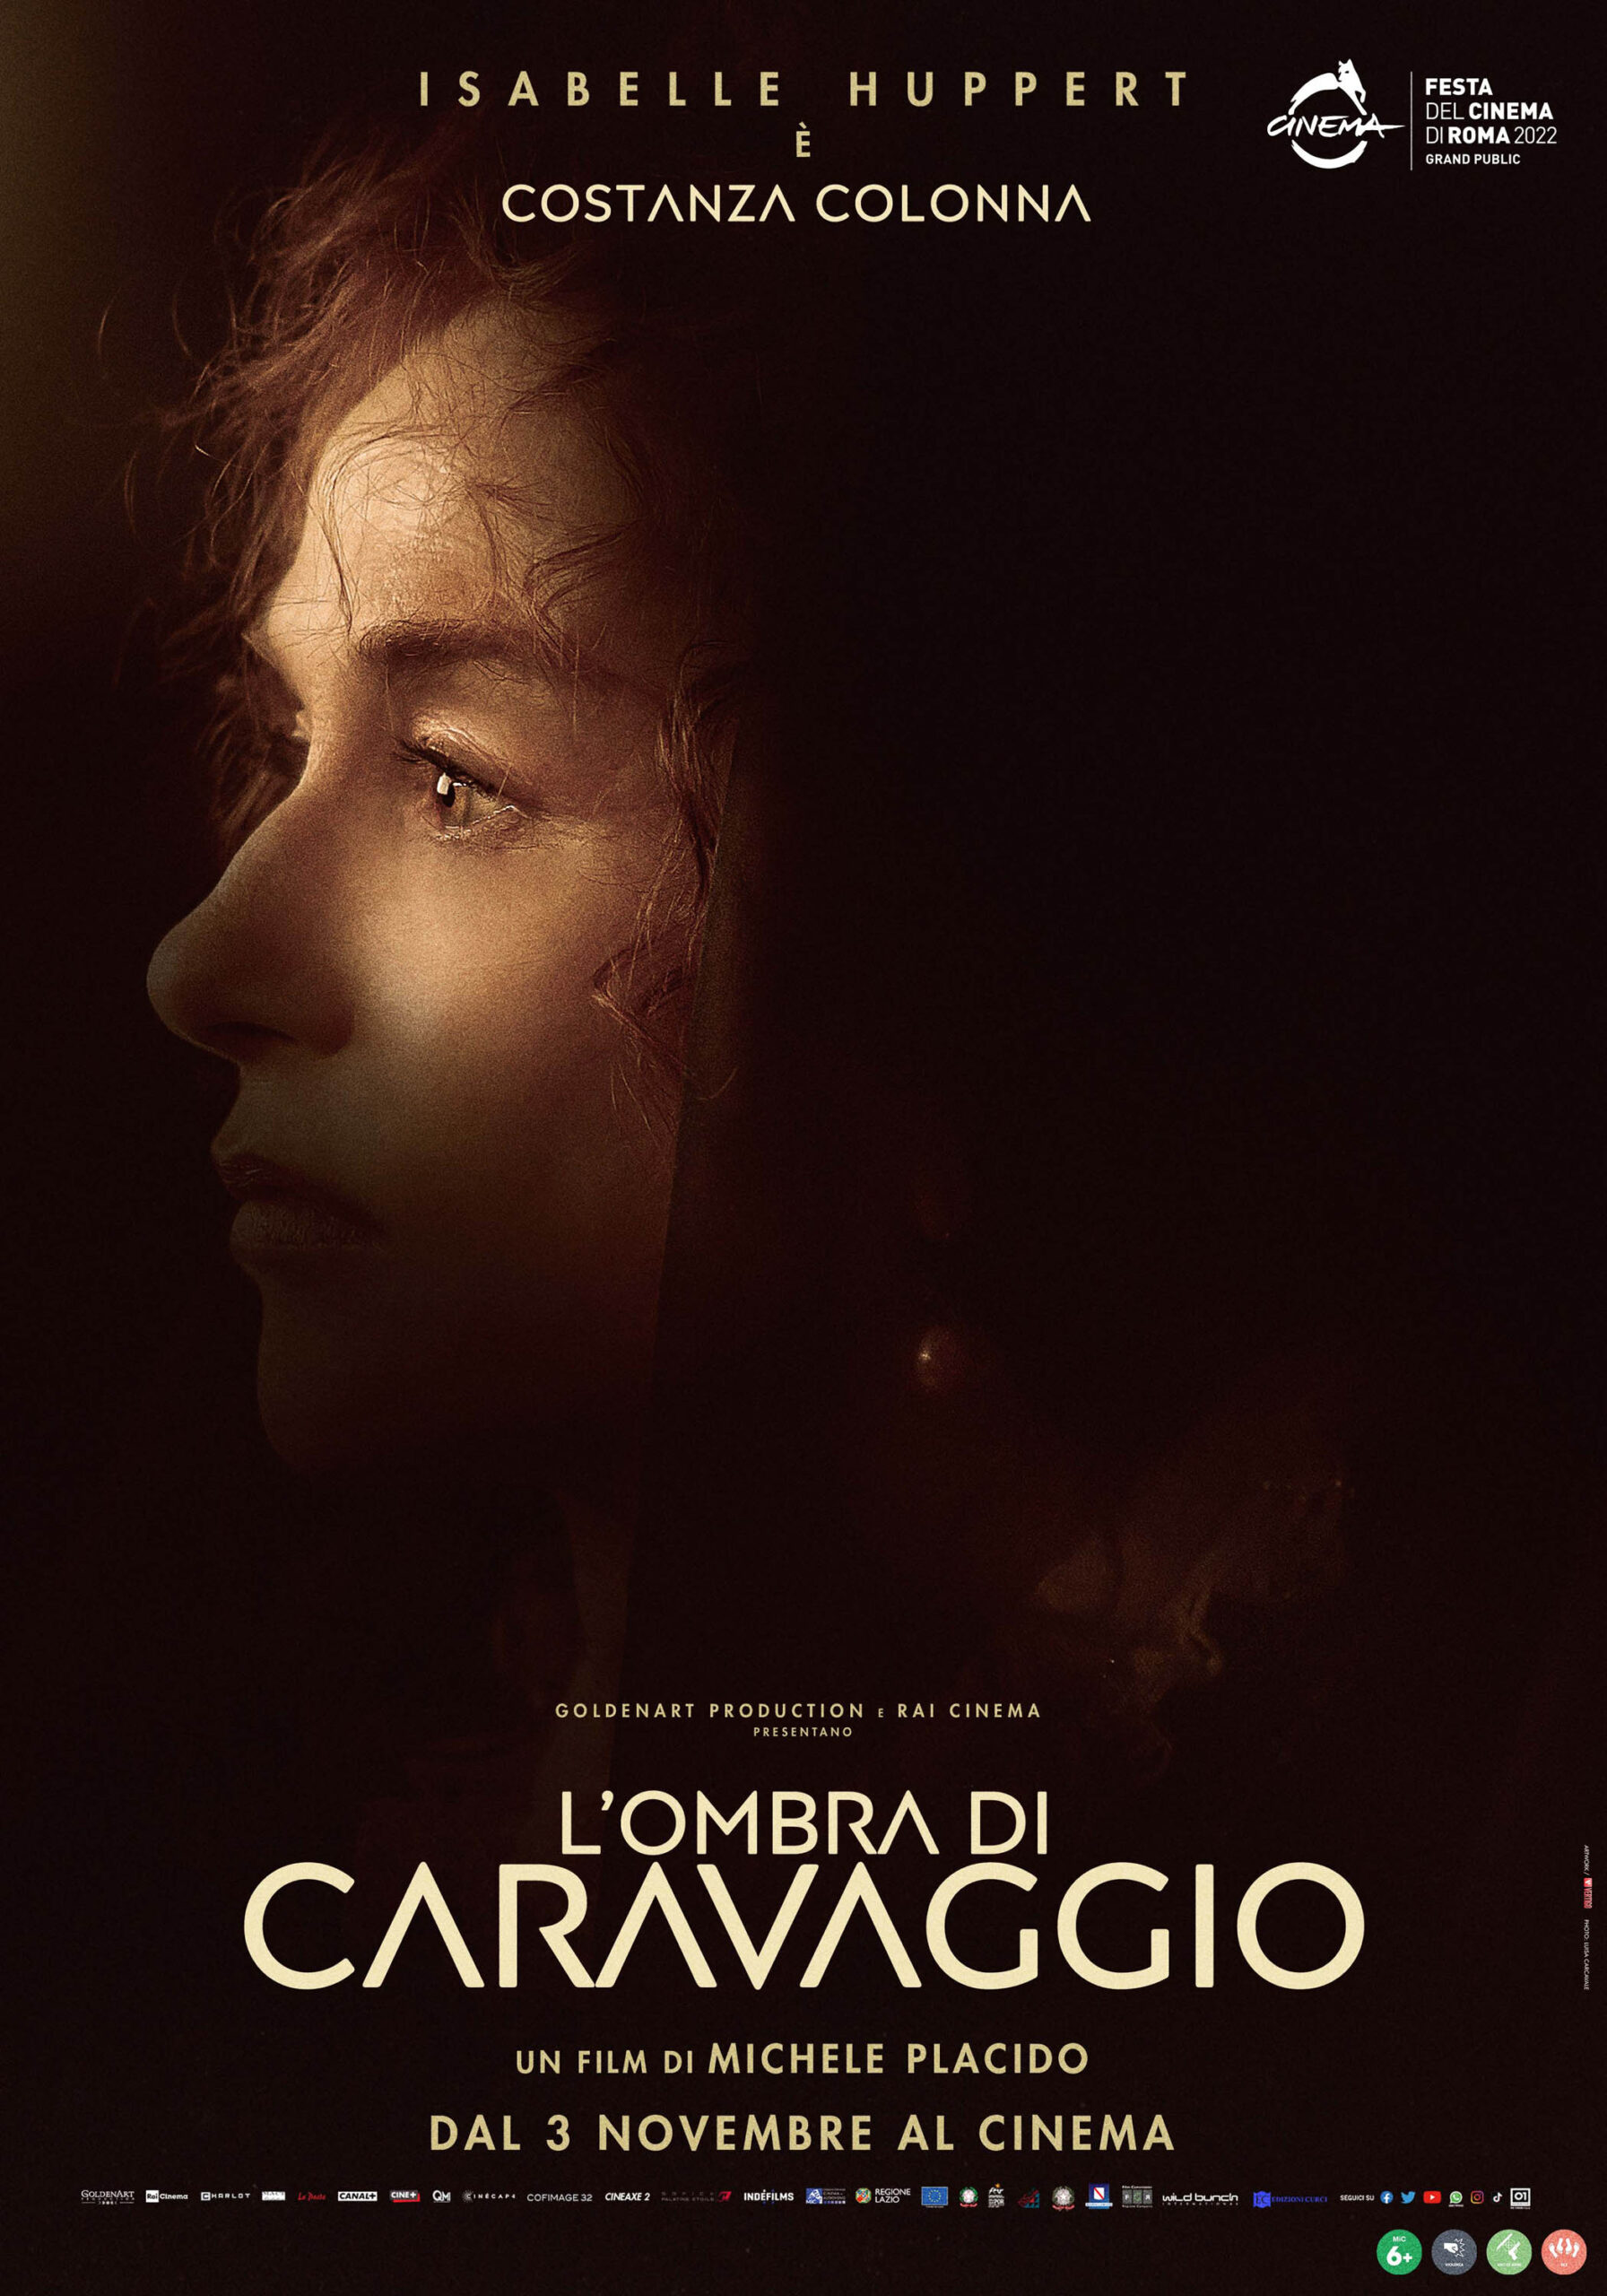 L'ombra di Caravaggio - Poster Isabelle Huppert